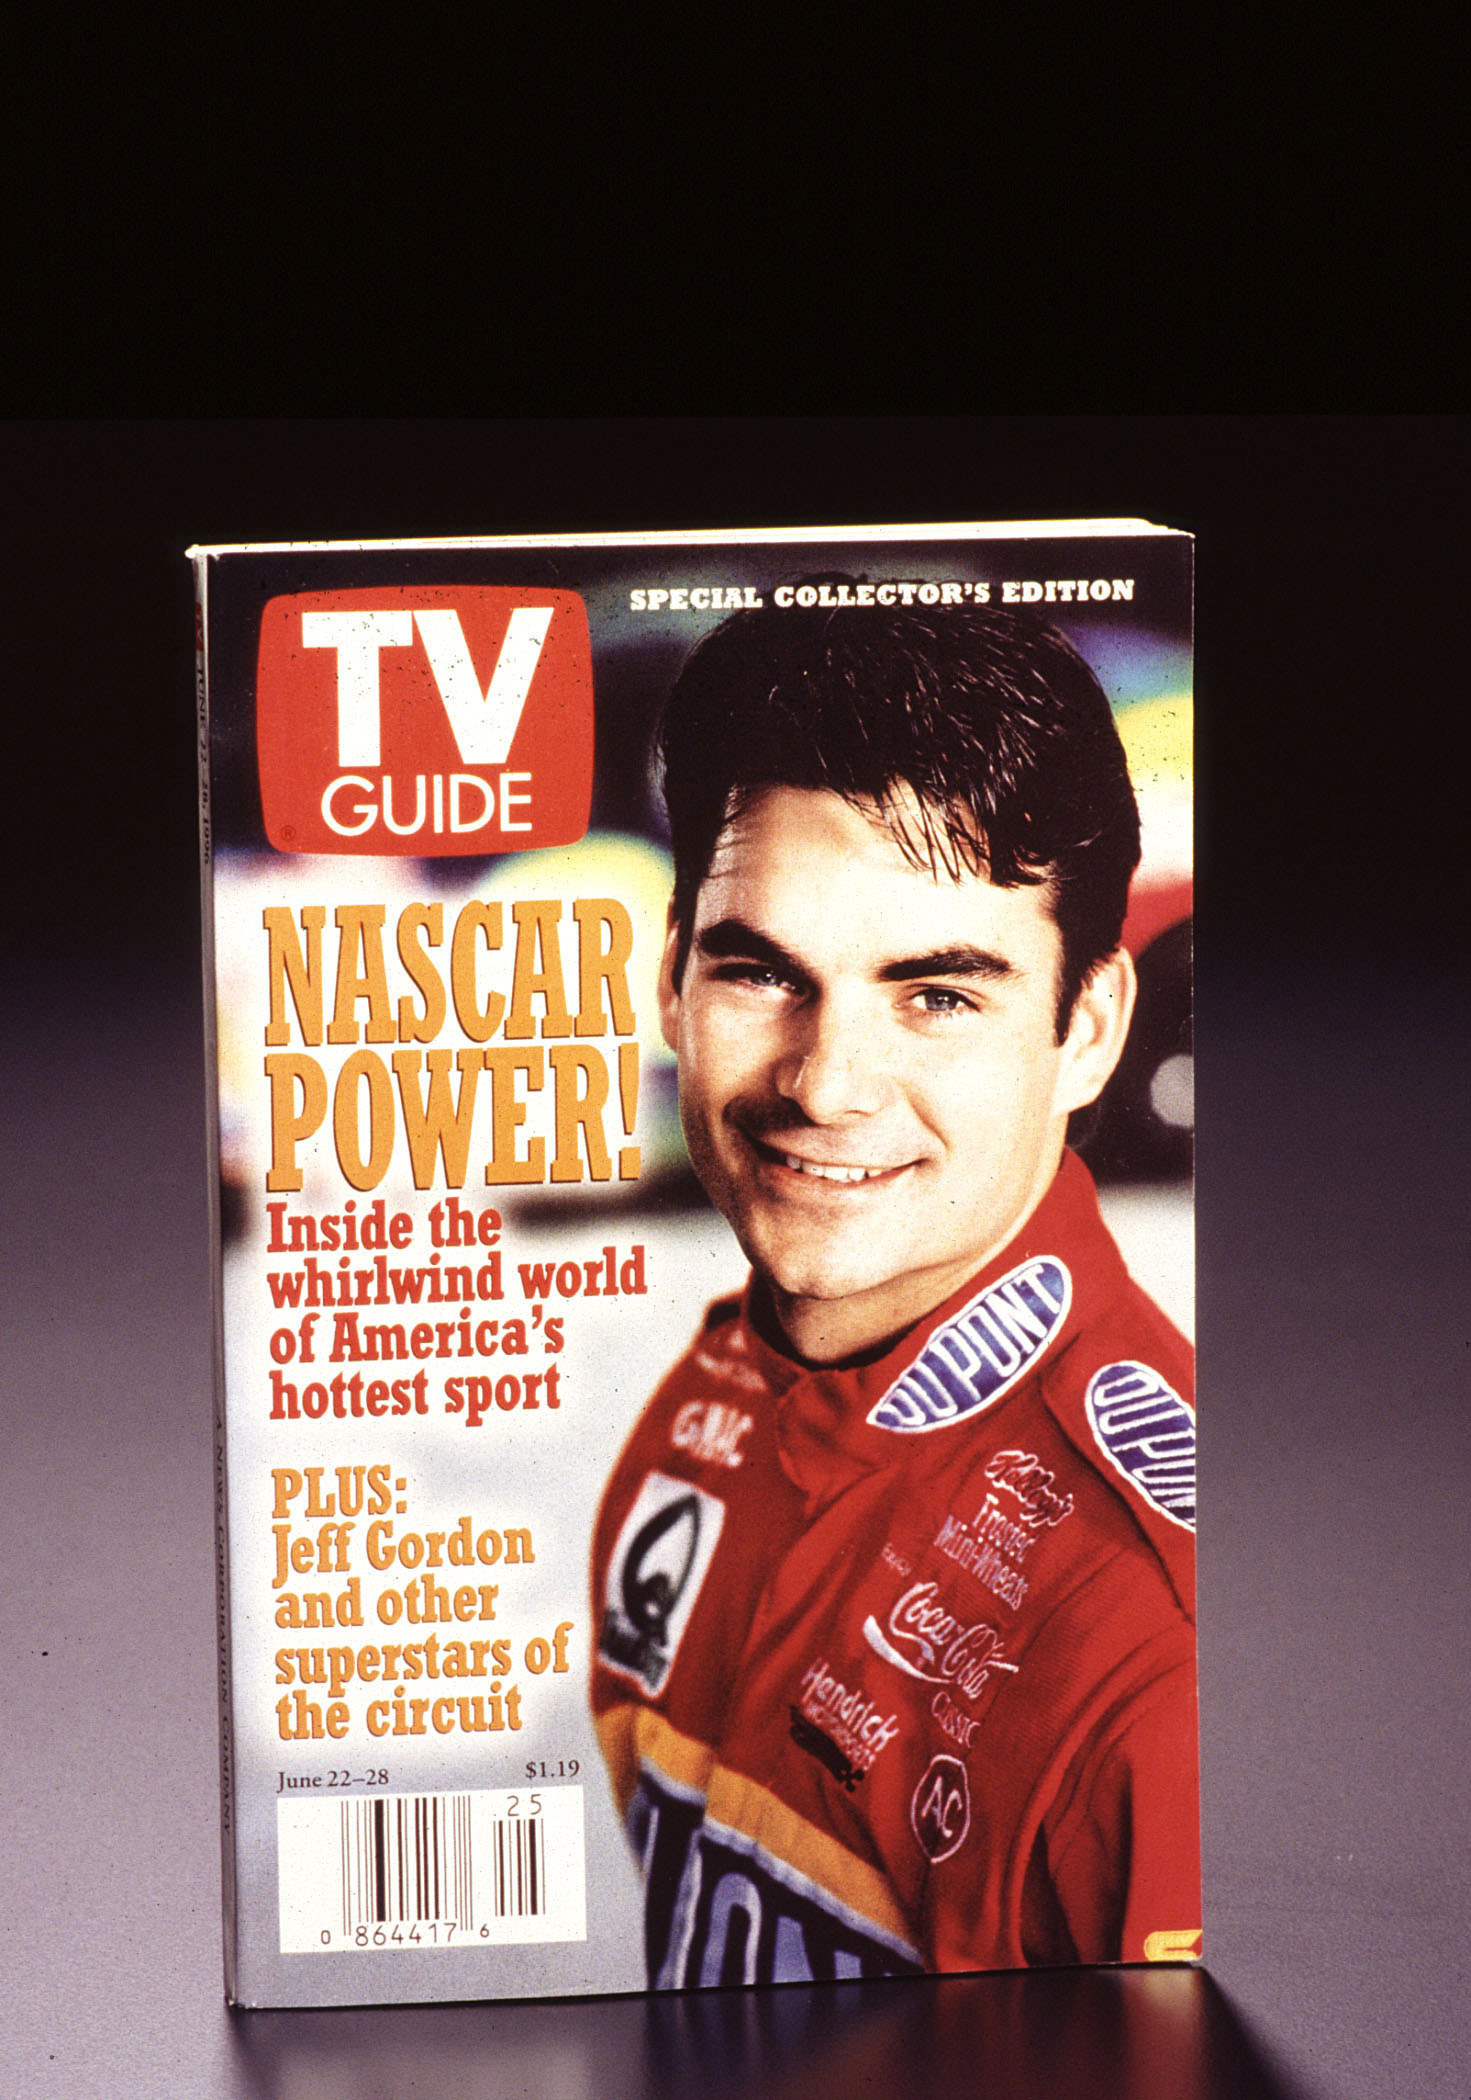 Jeff Gordon on the cover of TV GUide in 1996